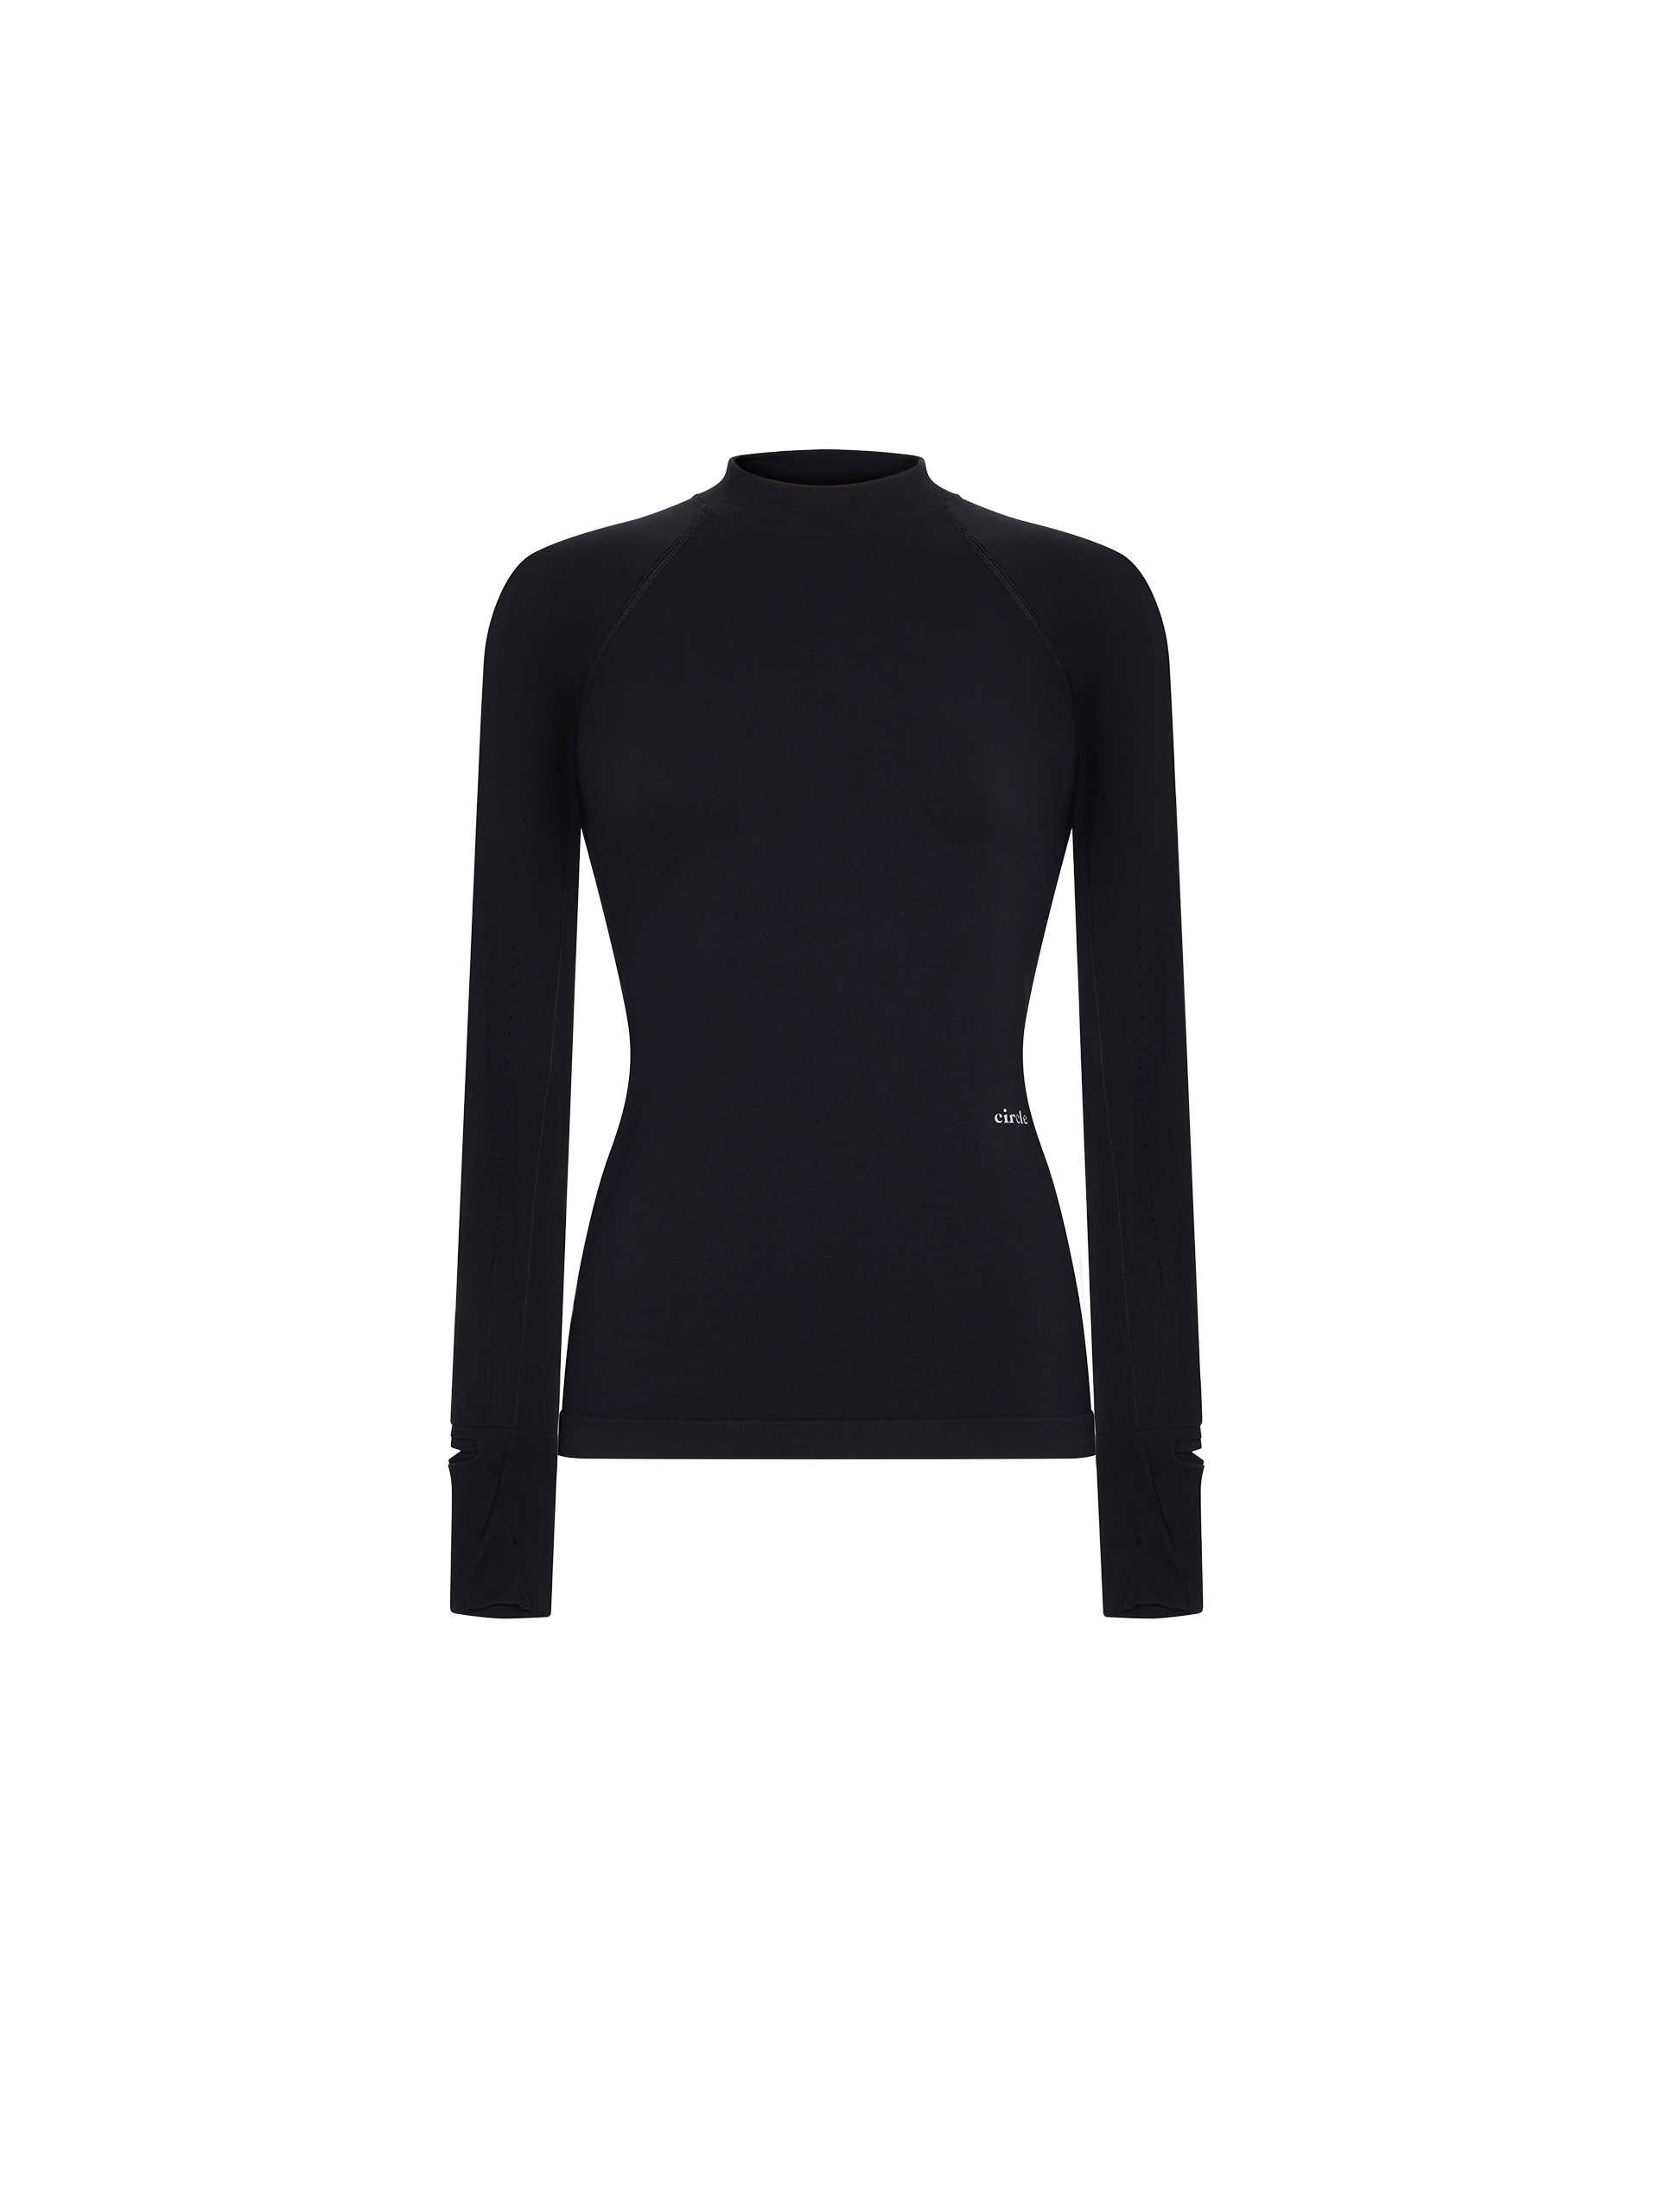 Baselayer, a real second skin feeling. Real second skin feeling. Think to provide maximum comfort and freedom of movement. Thermal insulation for runs in cold weather and all weather conditions.